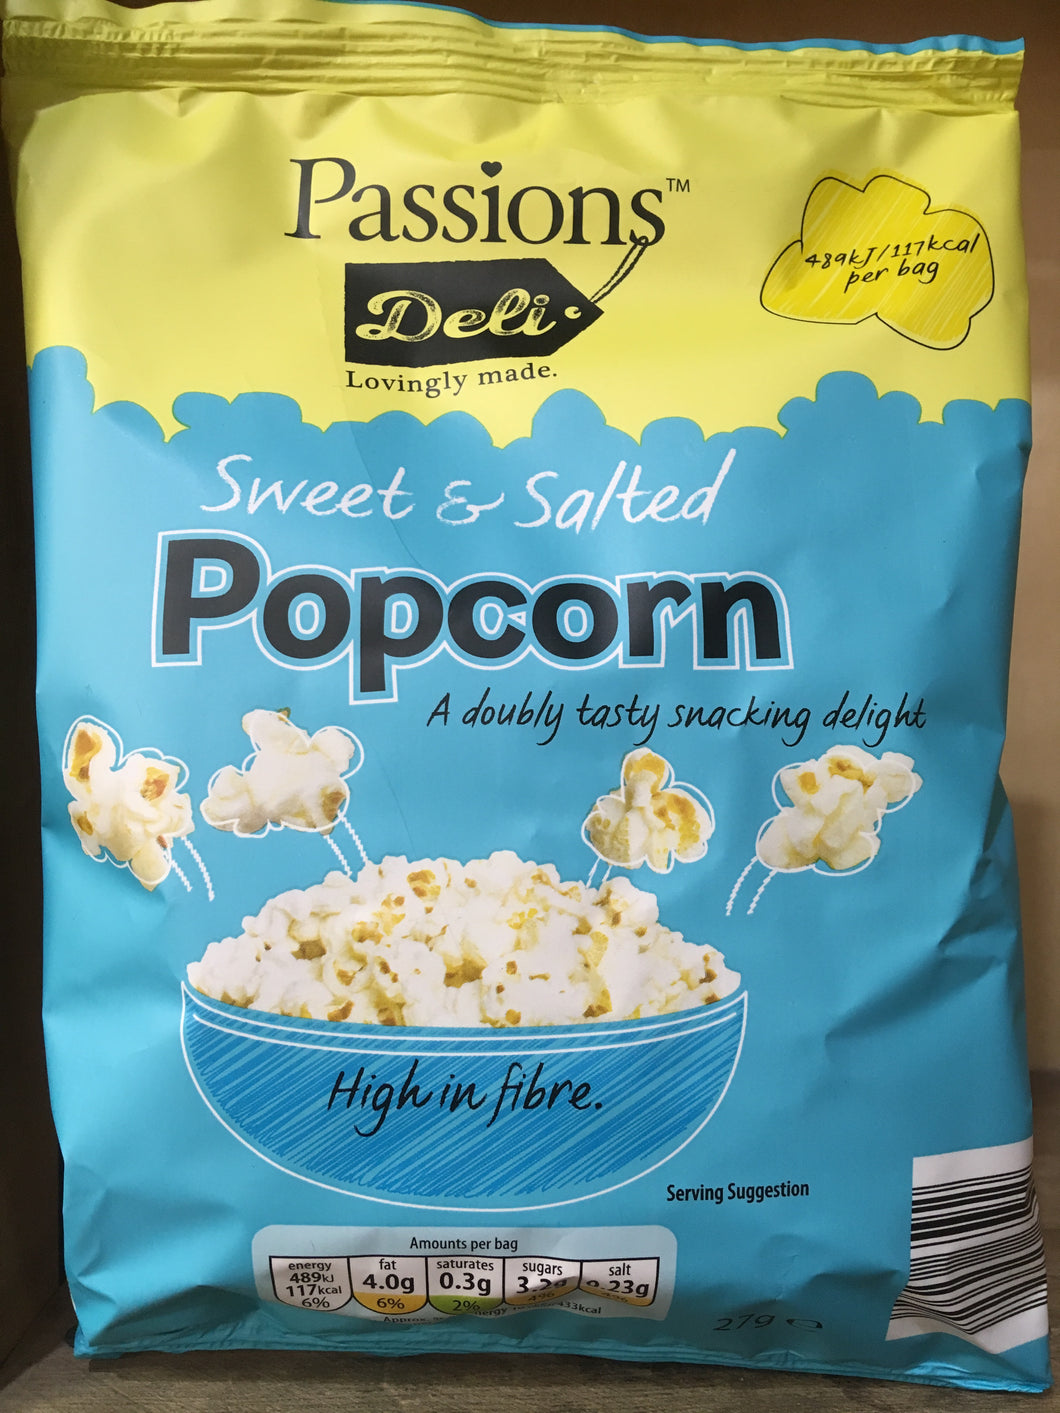 Passions Deli Sweet & Salted Popcorn 27g